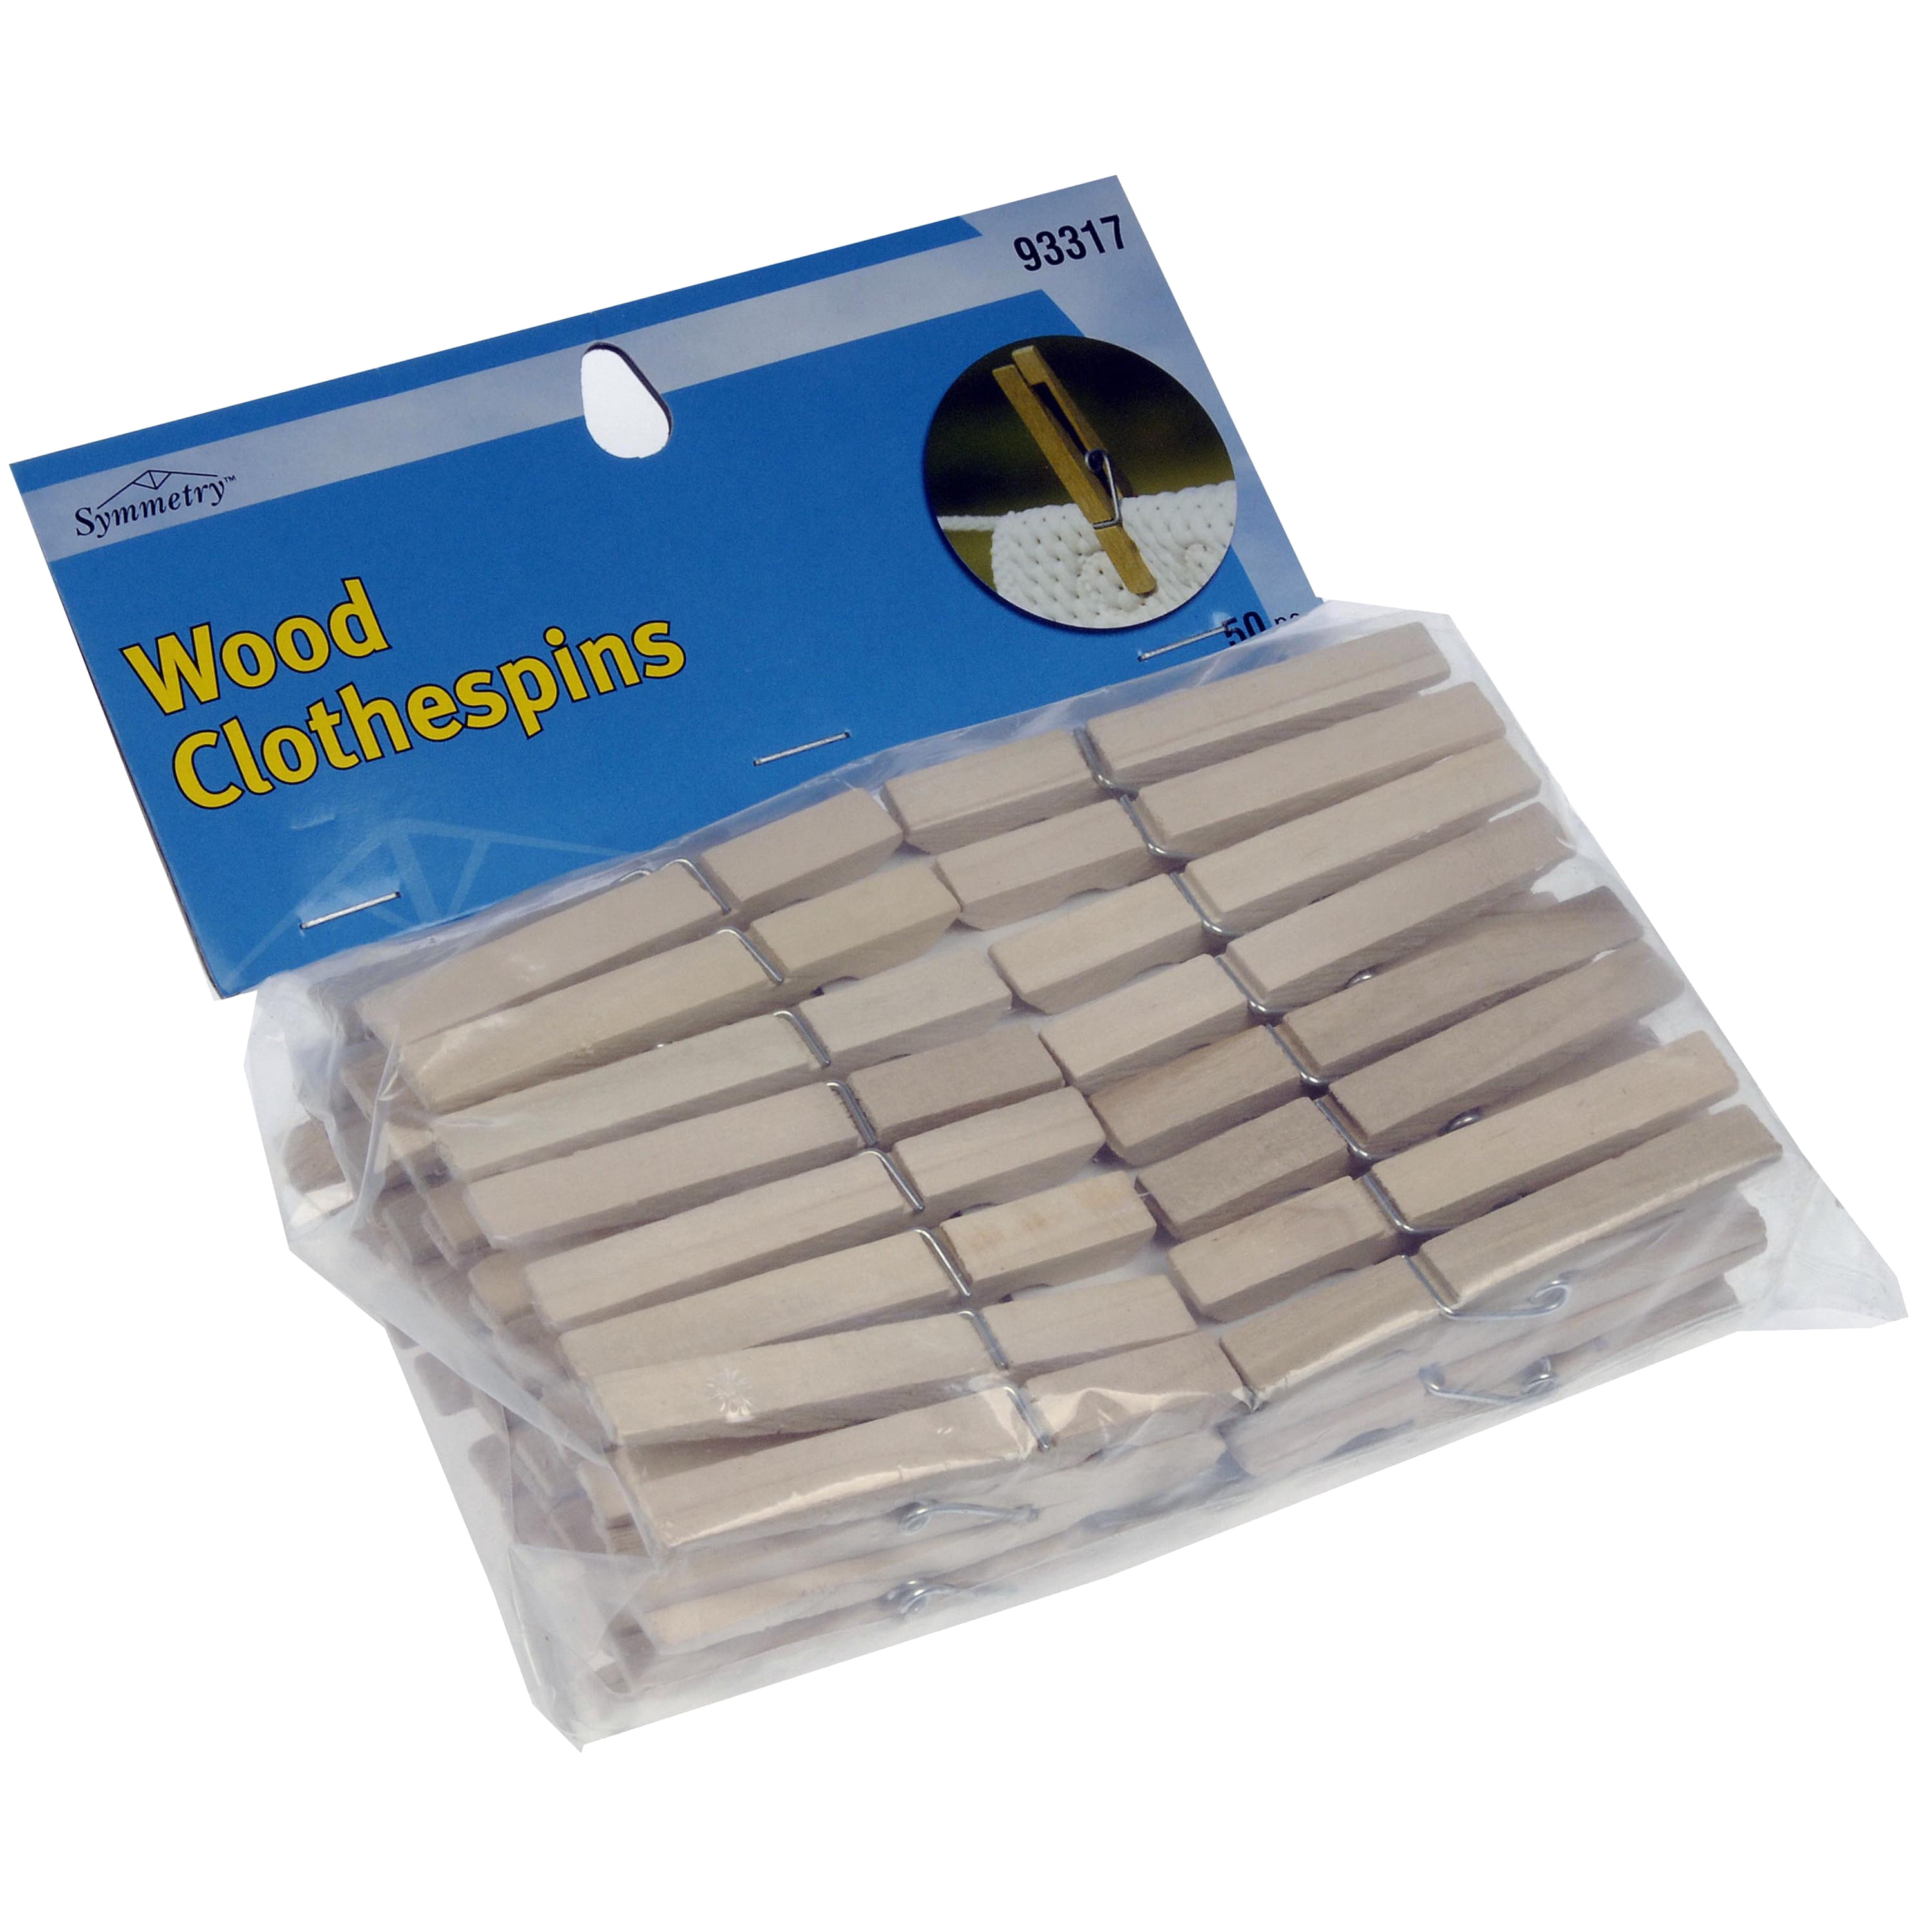 Designer's Image Plastic Clothespins 50 Count laundry or crafts 